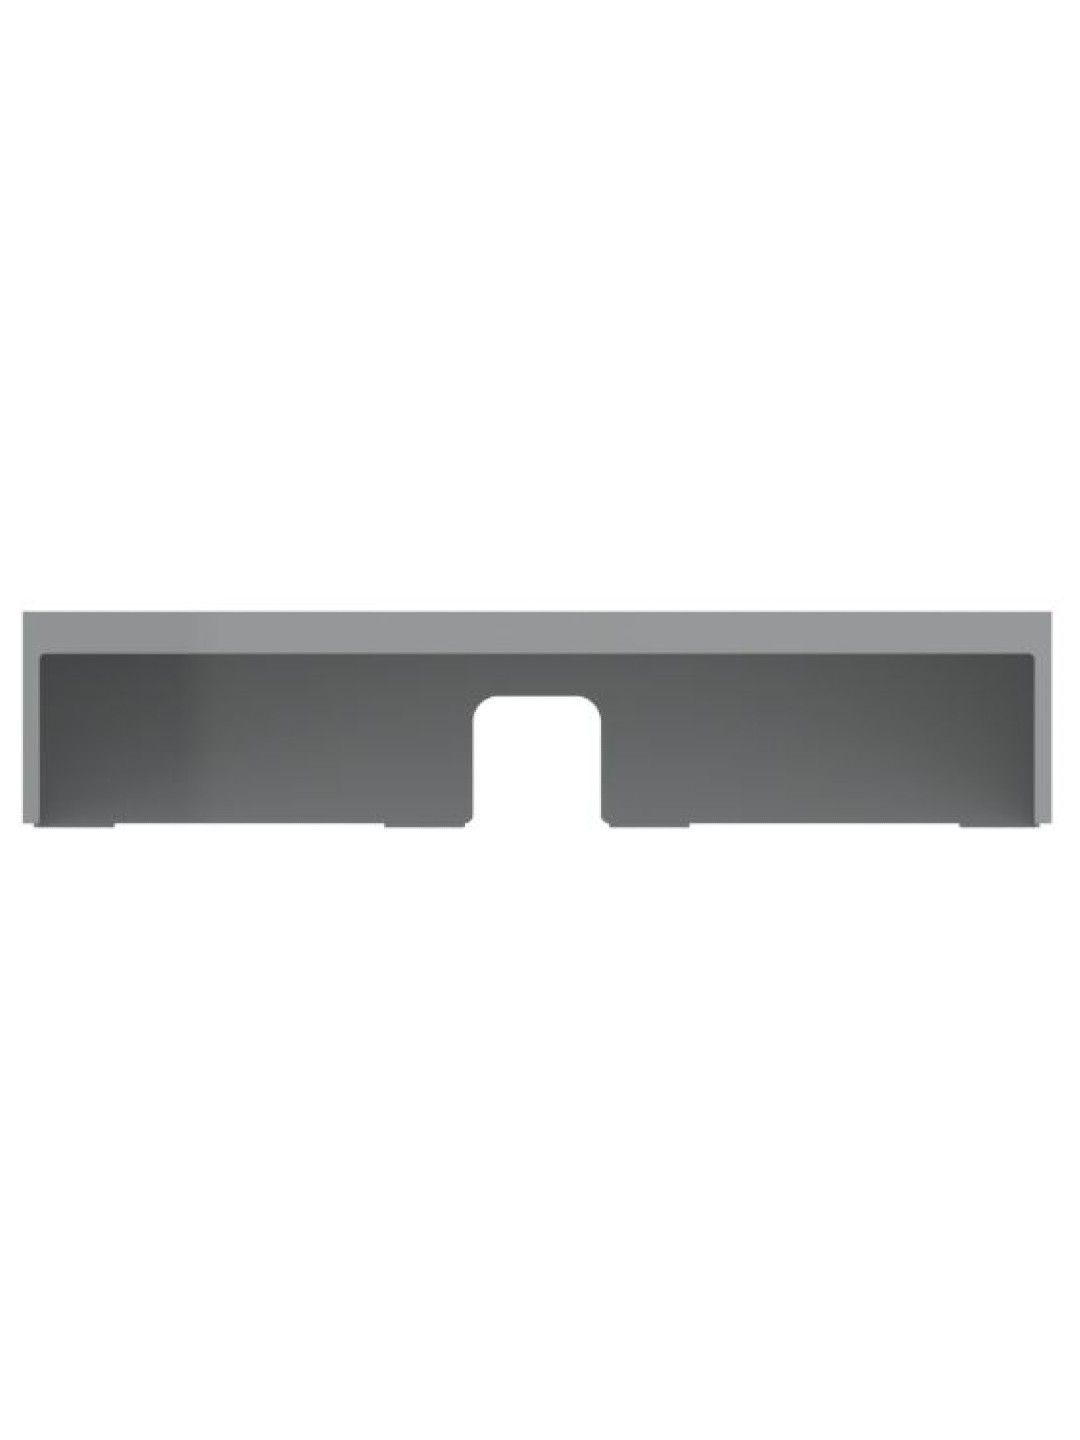 Sunbeams Lifestyle Gray Label Premium Monitor Stand (No Color- Image 2)